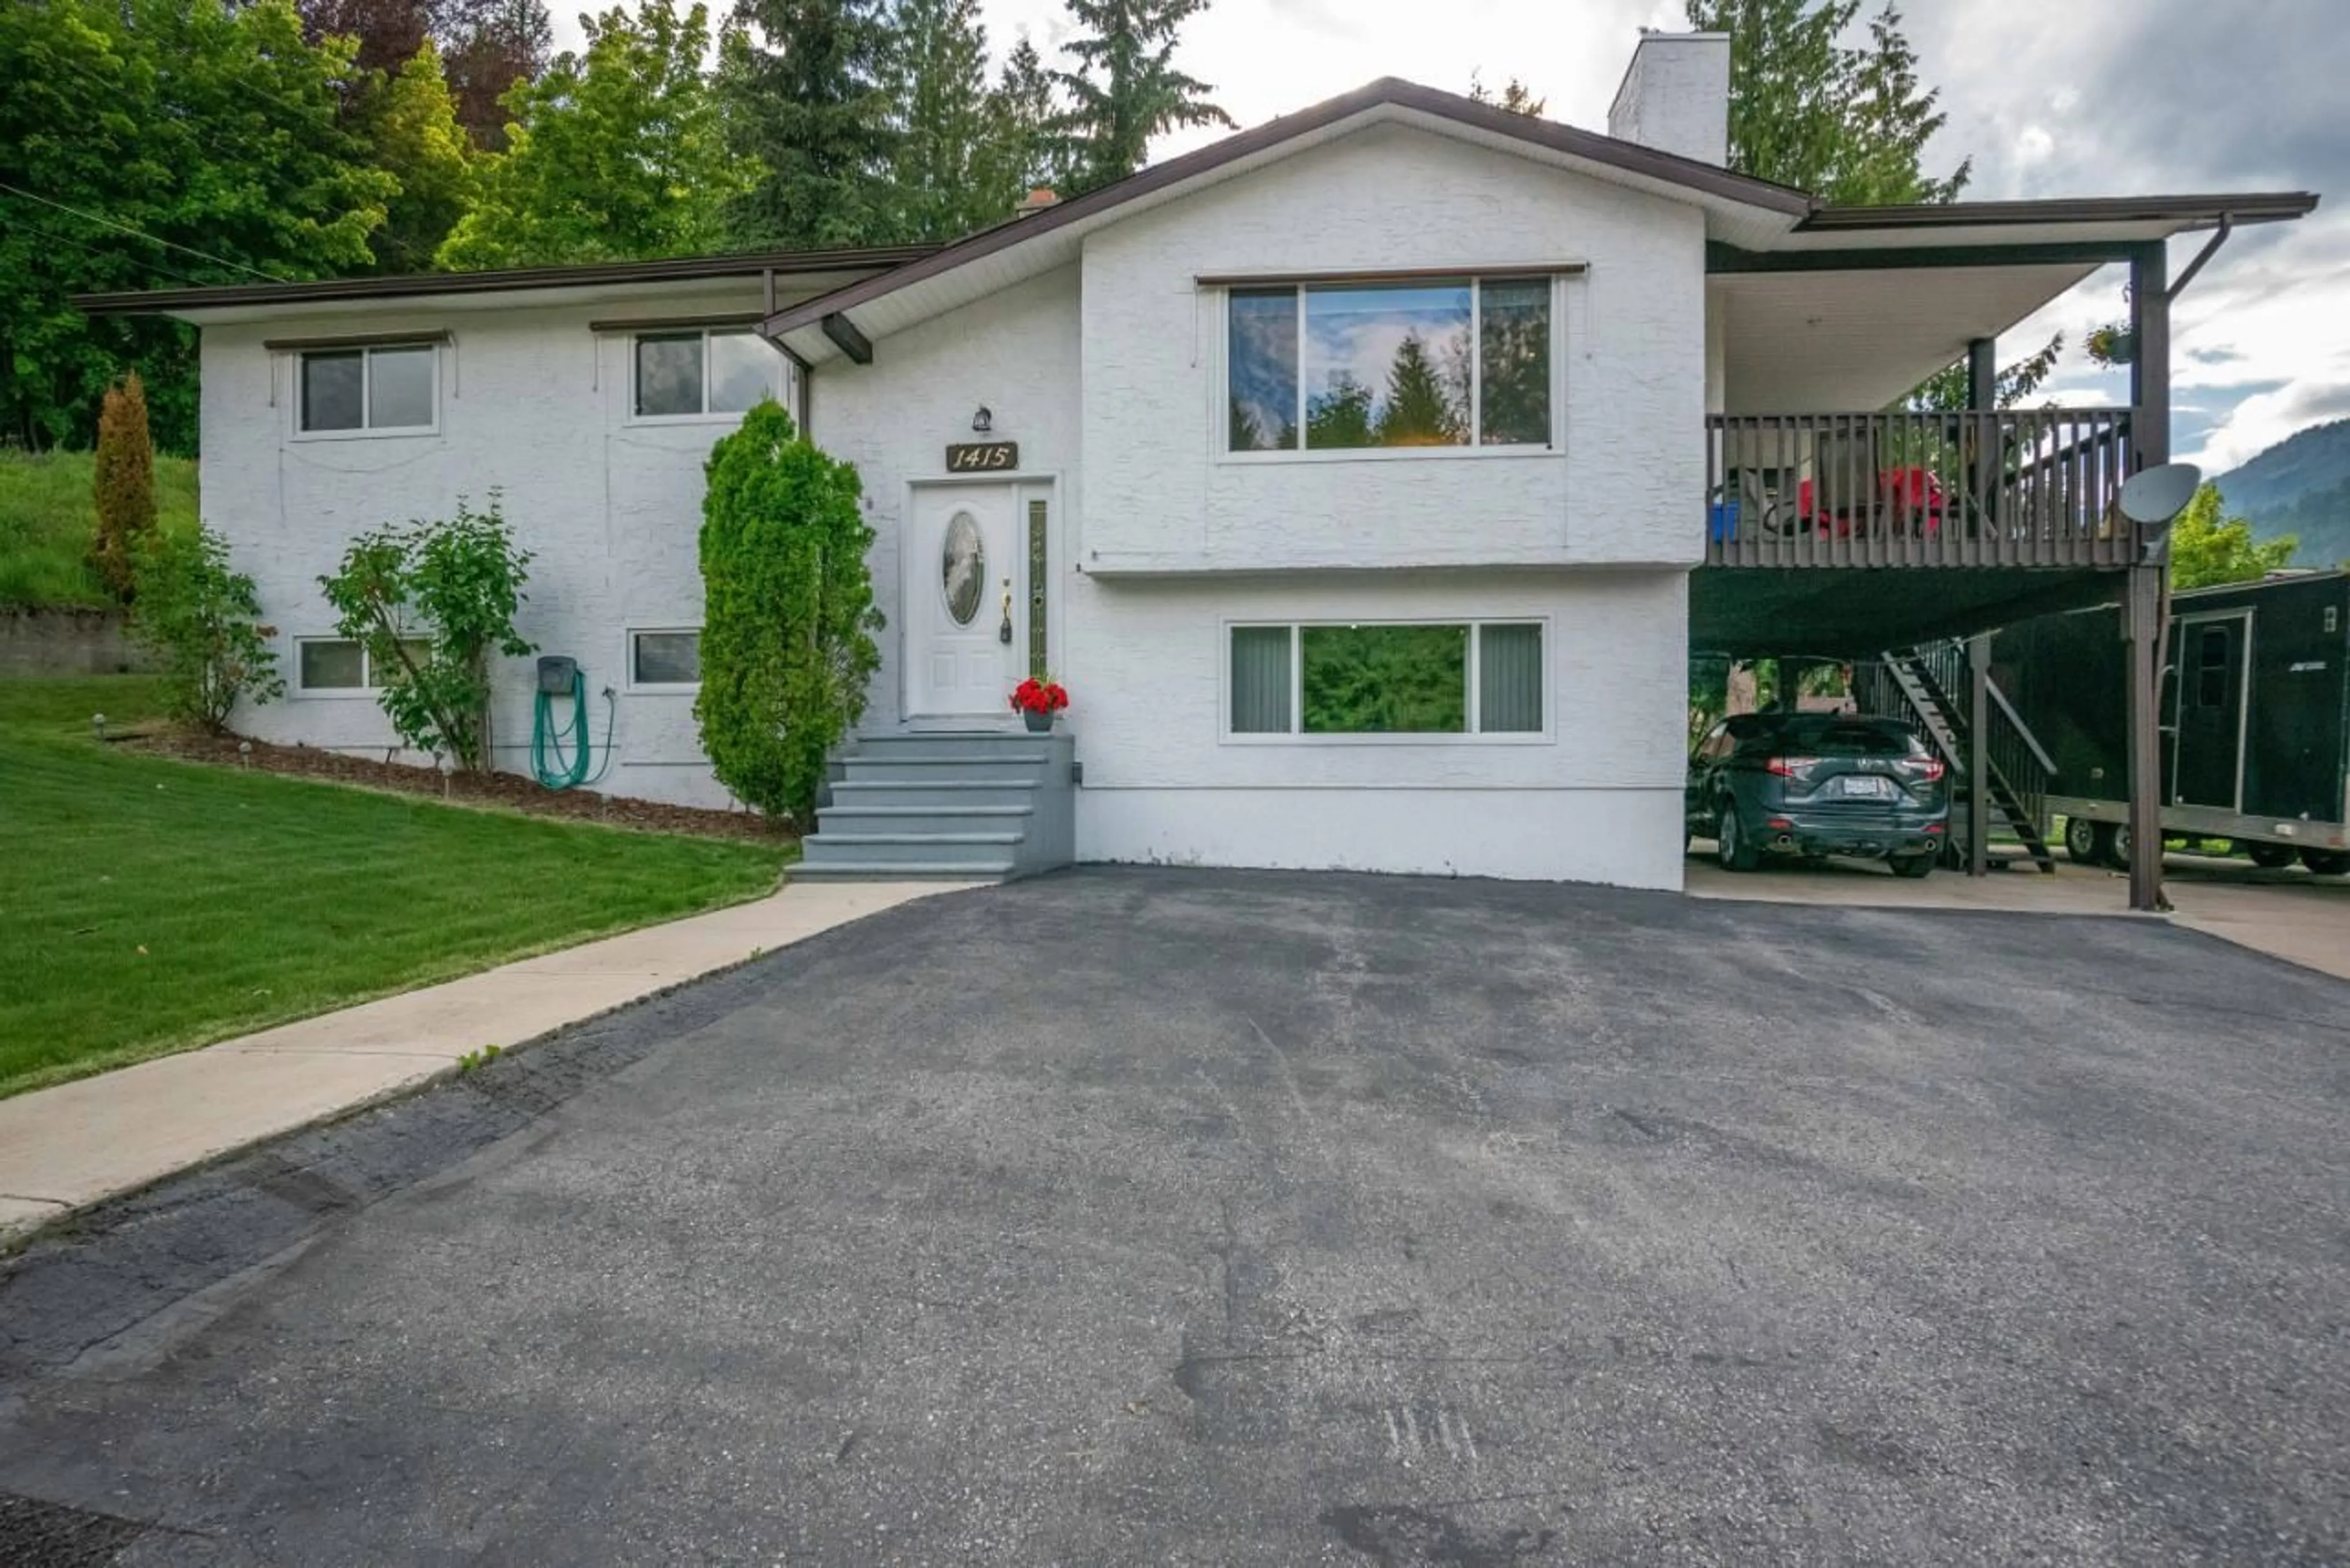 Outside view for 1415 EARL STREET, Rossland British Columbia V0G1Y0